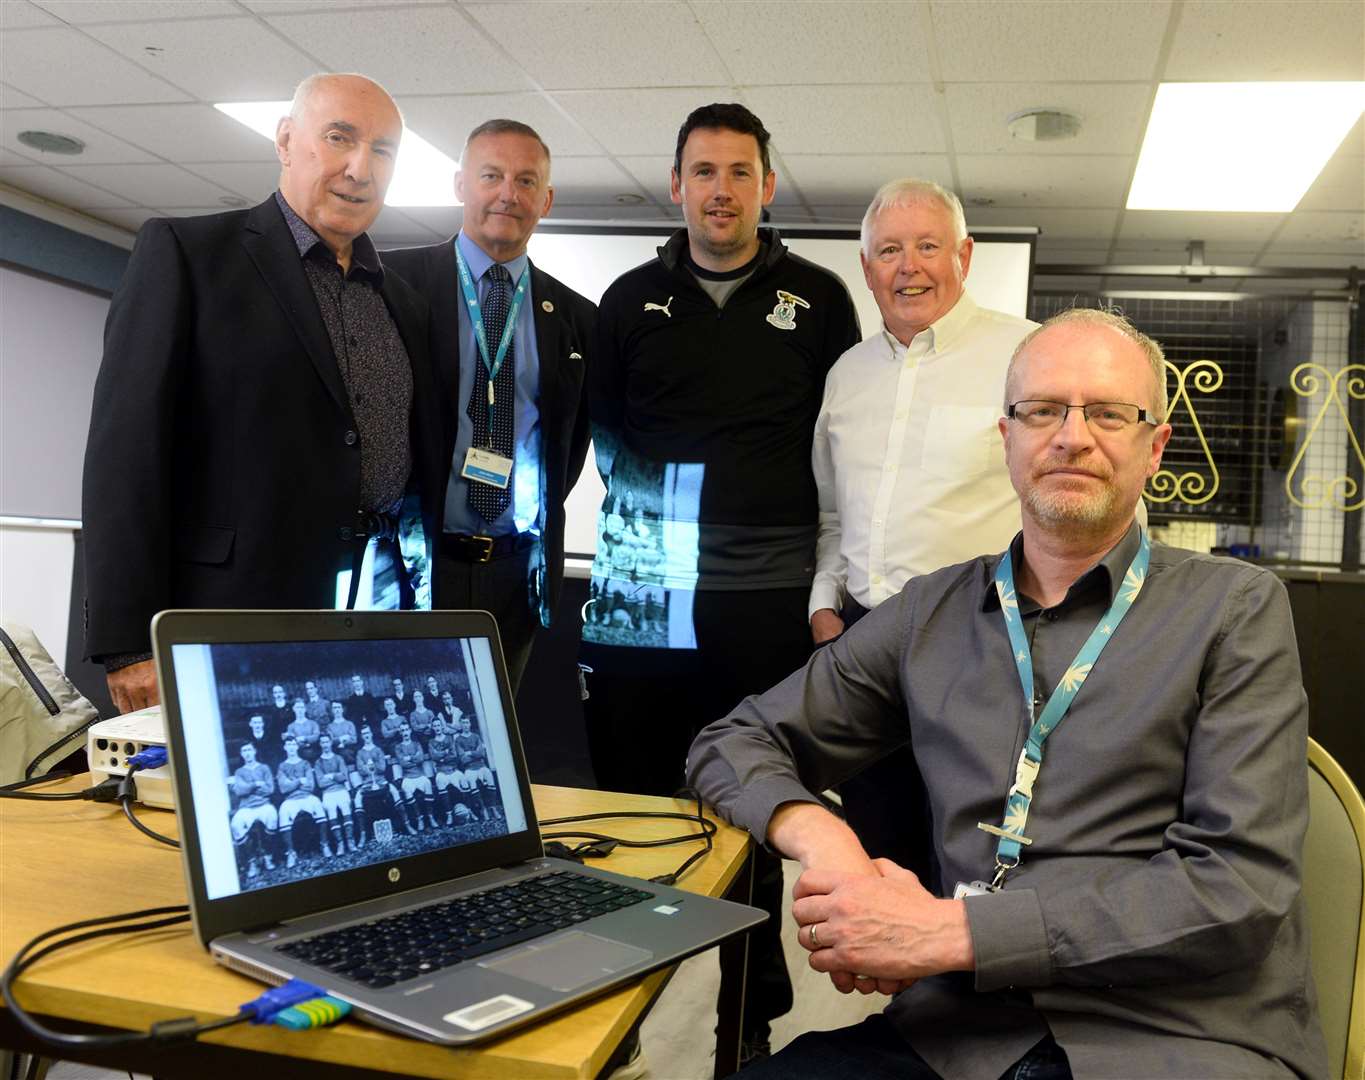 The launch of the Inverness Football Memories project with Bill McAllister memories researcher; John West High Life Highland; Craig Masterton, ICT community trust manager; Gordon Fyfe, joint chairman of ICT community trust; and Jamie Gaukroger of High Life Highland. Picture: Gary Anthony